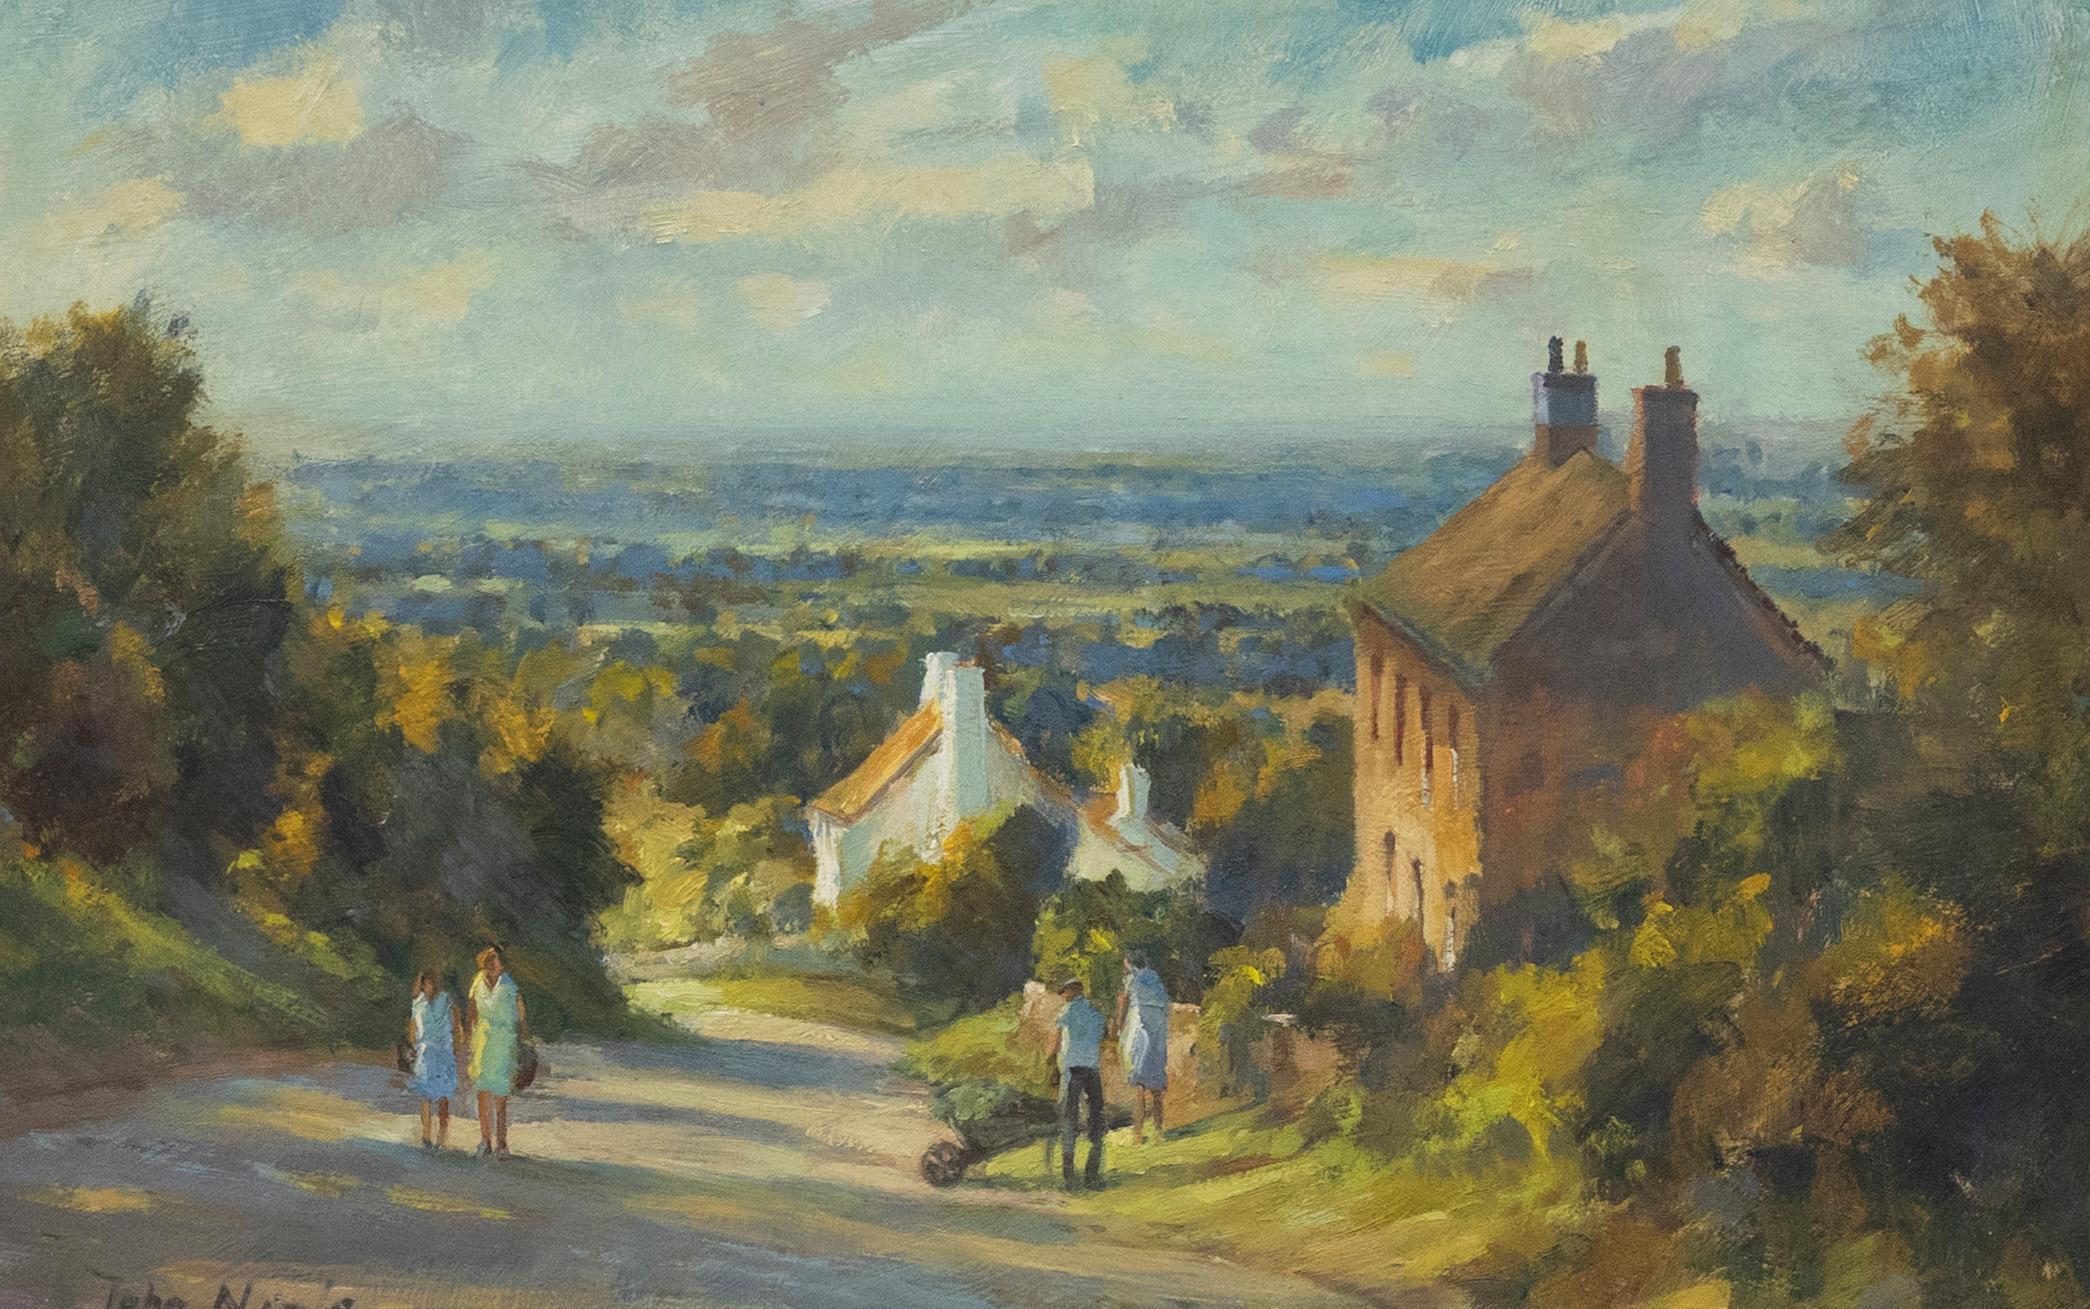 An original oil by John Neale, depicting figures strolling Dover's Hill in the idyllic Cotswolds. The impressionistic study has been beautifully presented in a gilt and wood frame with a white coloured slip. Signed to the lower left edge. On canvas